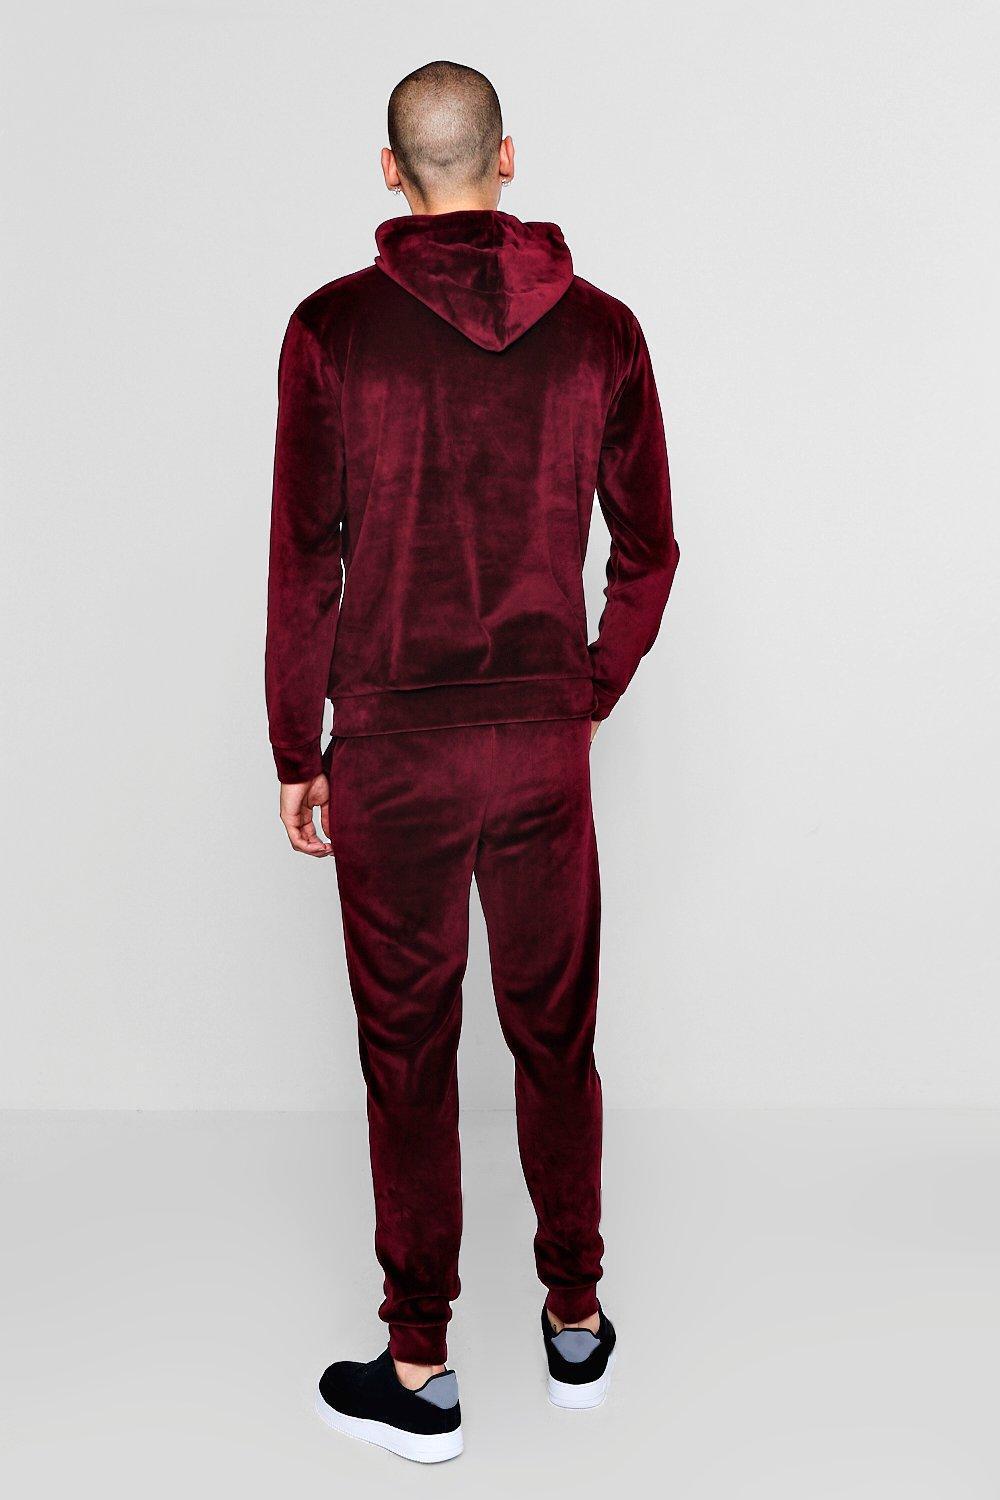 Boohoo Man Signature Velour Hooded Tracksuit in Red for Men - Lyst